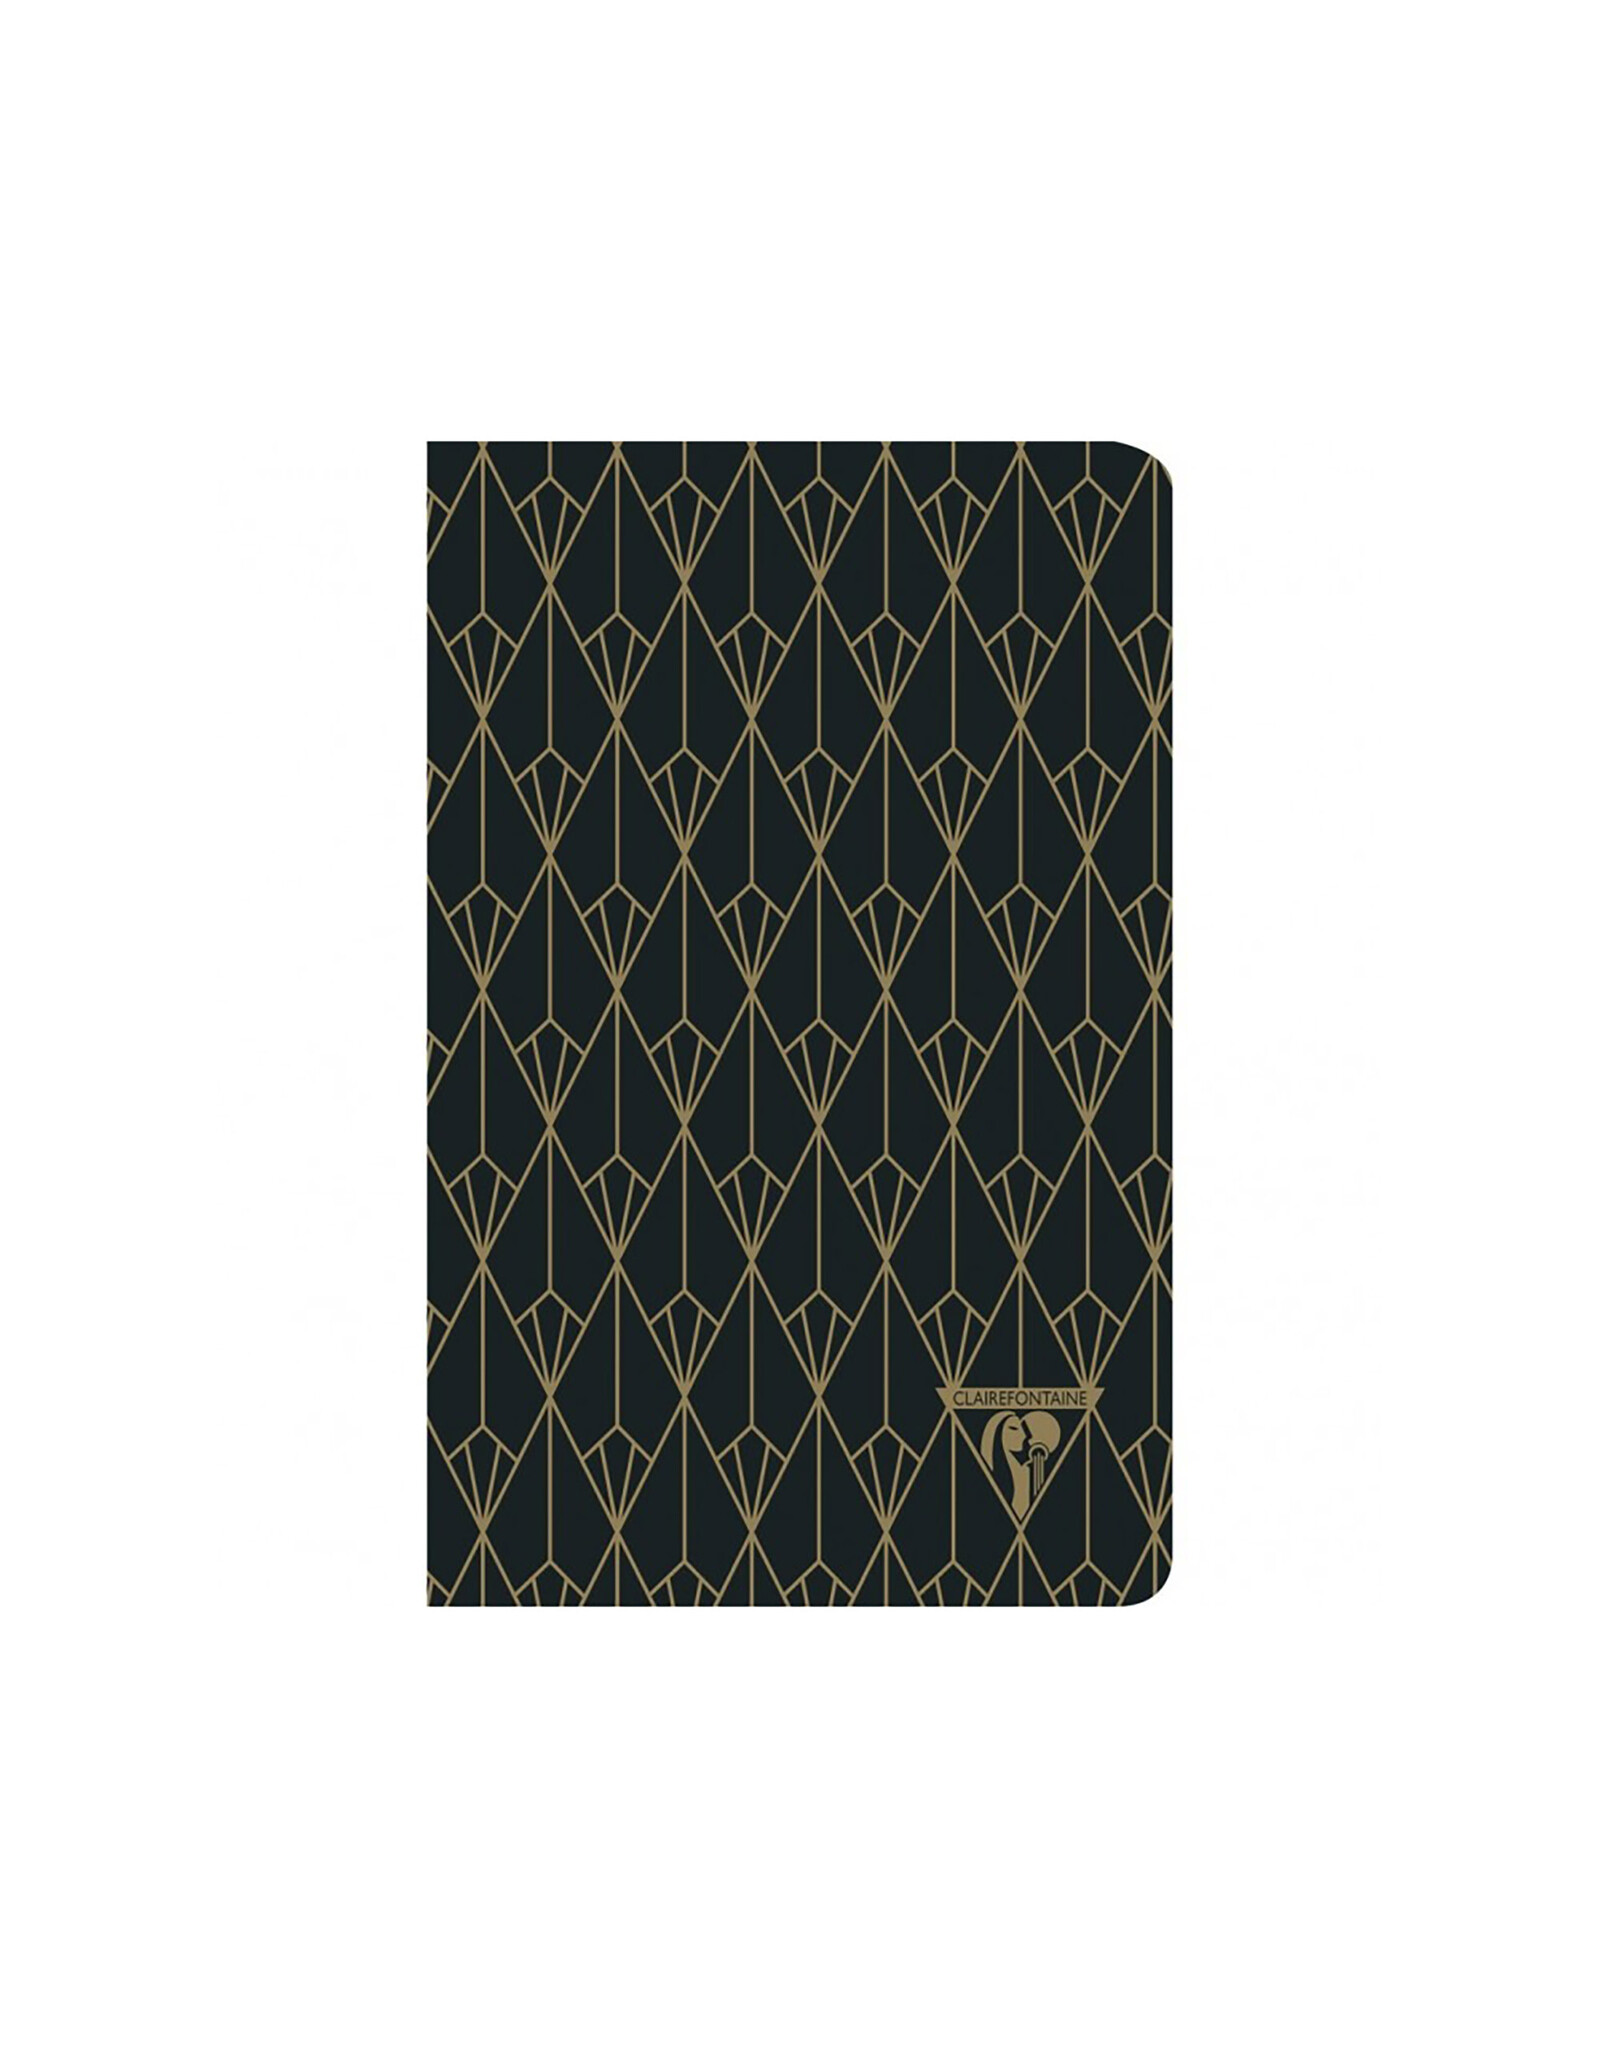 Clairefontaine Diamond Pattern Ebony Black Neo Deco Lined A5 Notebook